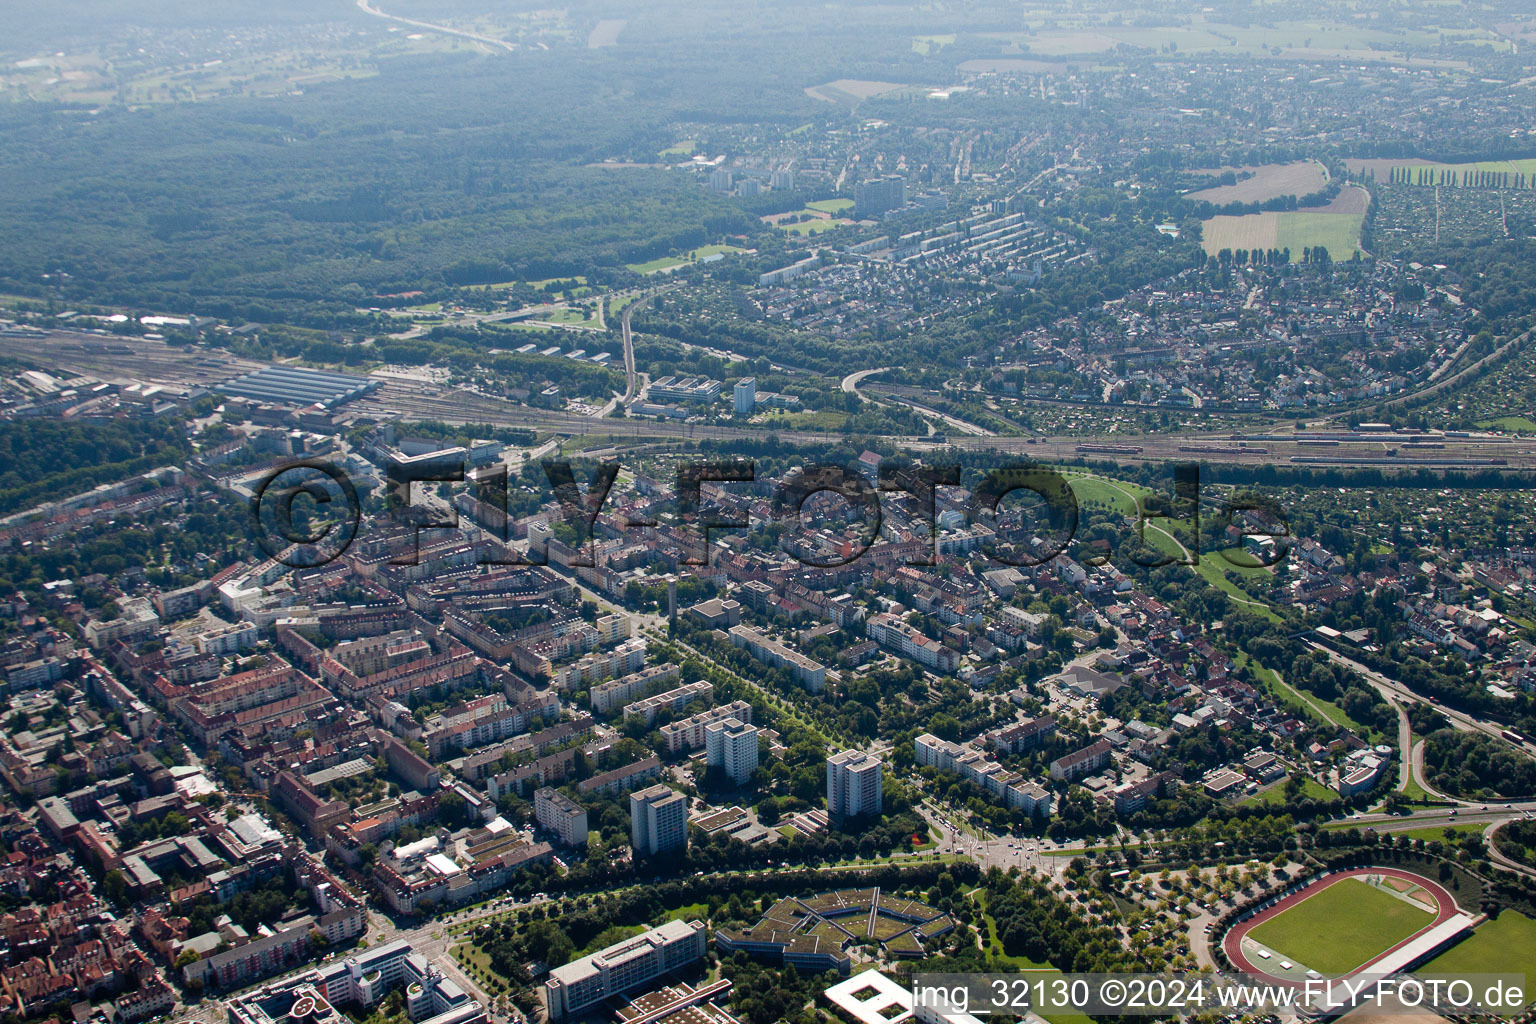 Track progress and building of the main station of the railway in Karlsruhe in the state Baden-Wurttemberg viewn from the air